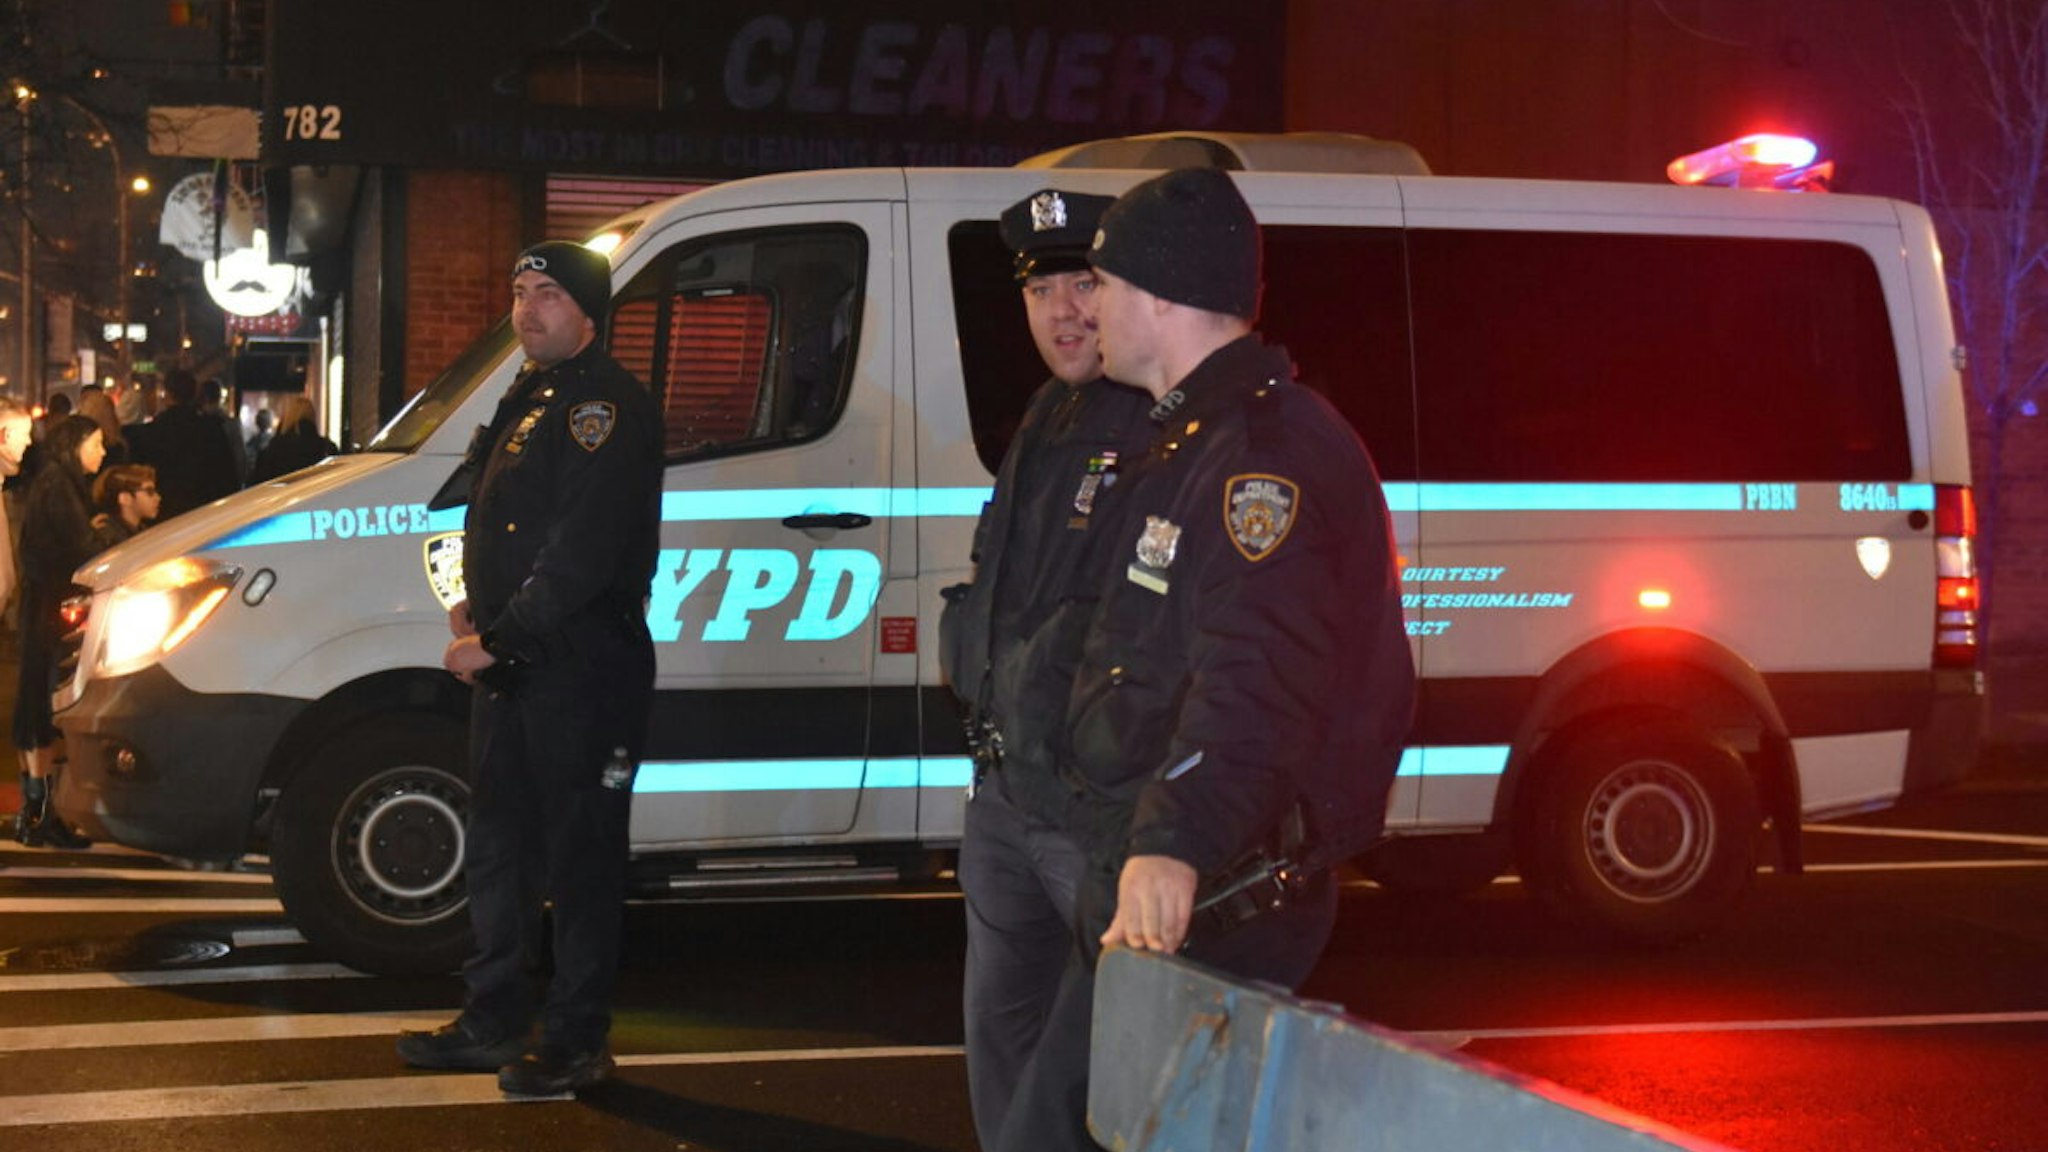 Police officers stand guard on a road after a 19-year-old assailant attacked three NYPD officers with a machete near Times Square during the new year celebrations in New York, United States on December 31, 2022